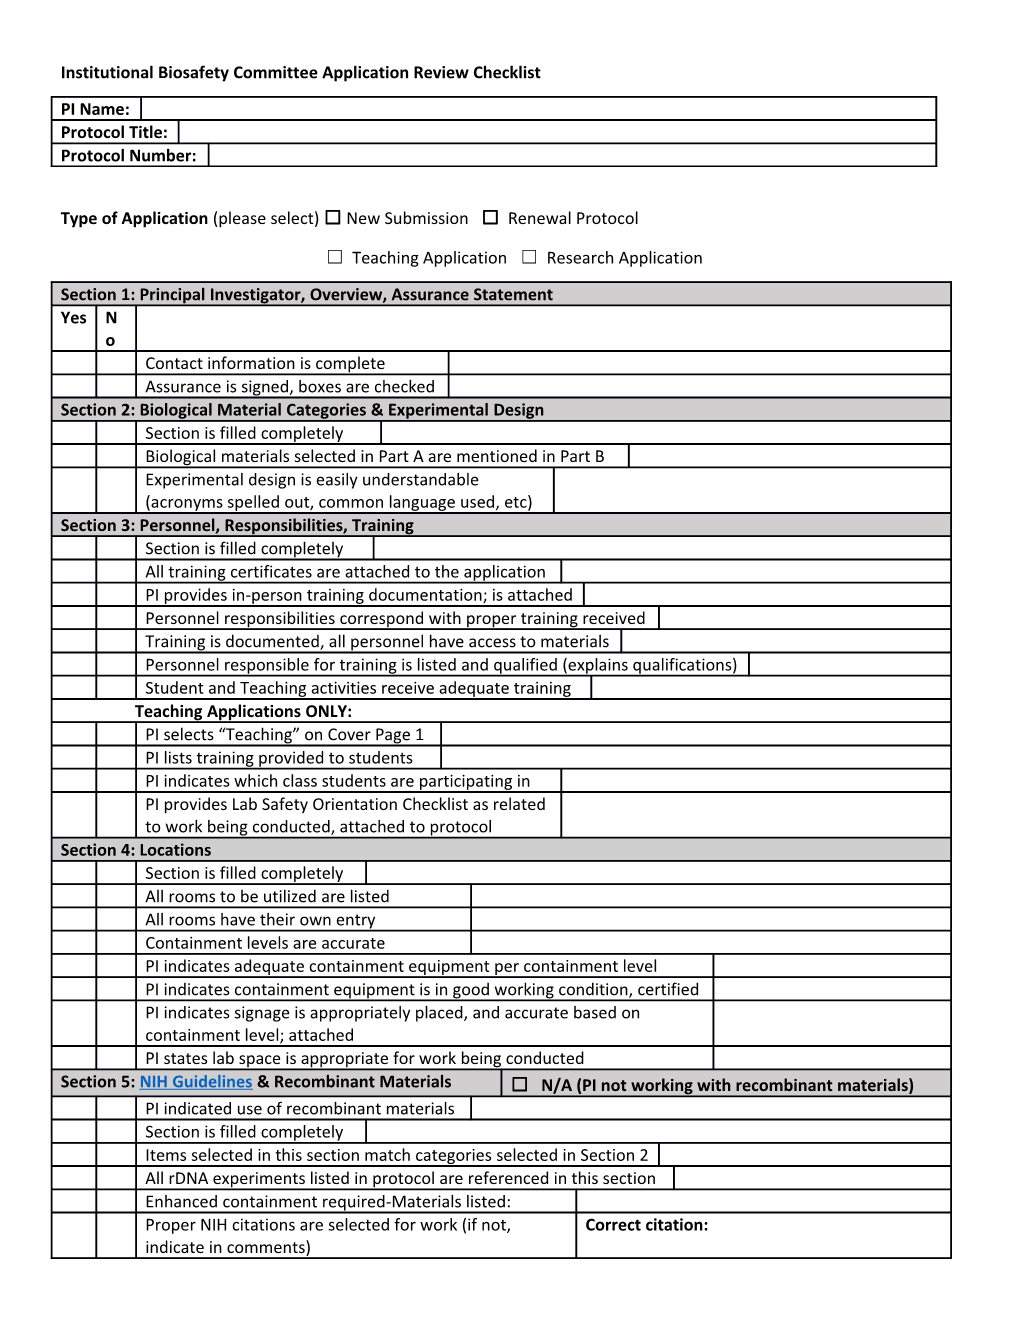 Institutional Biosafety Committee Application Review Checklist